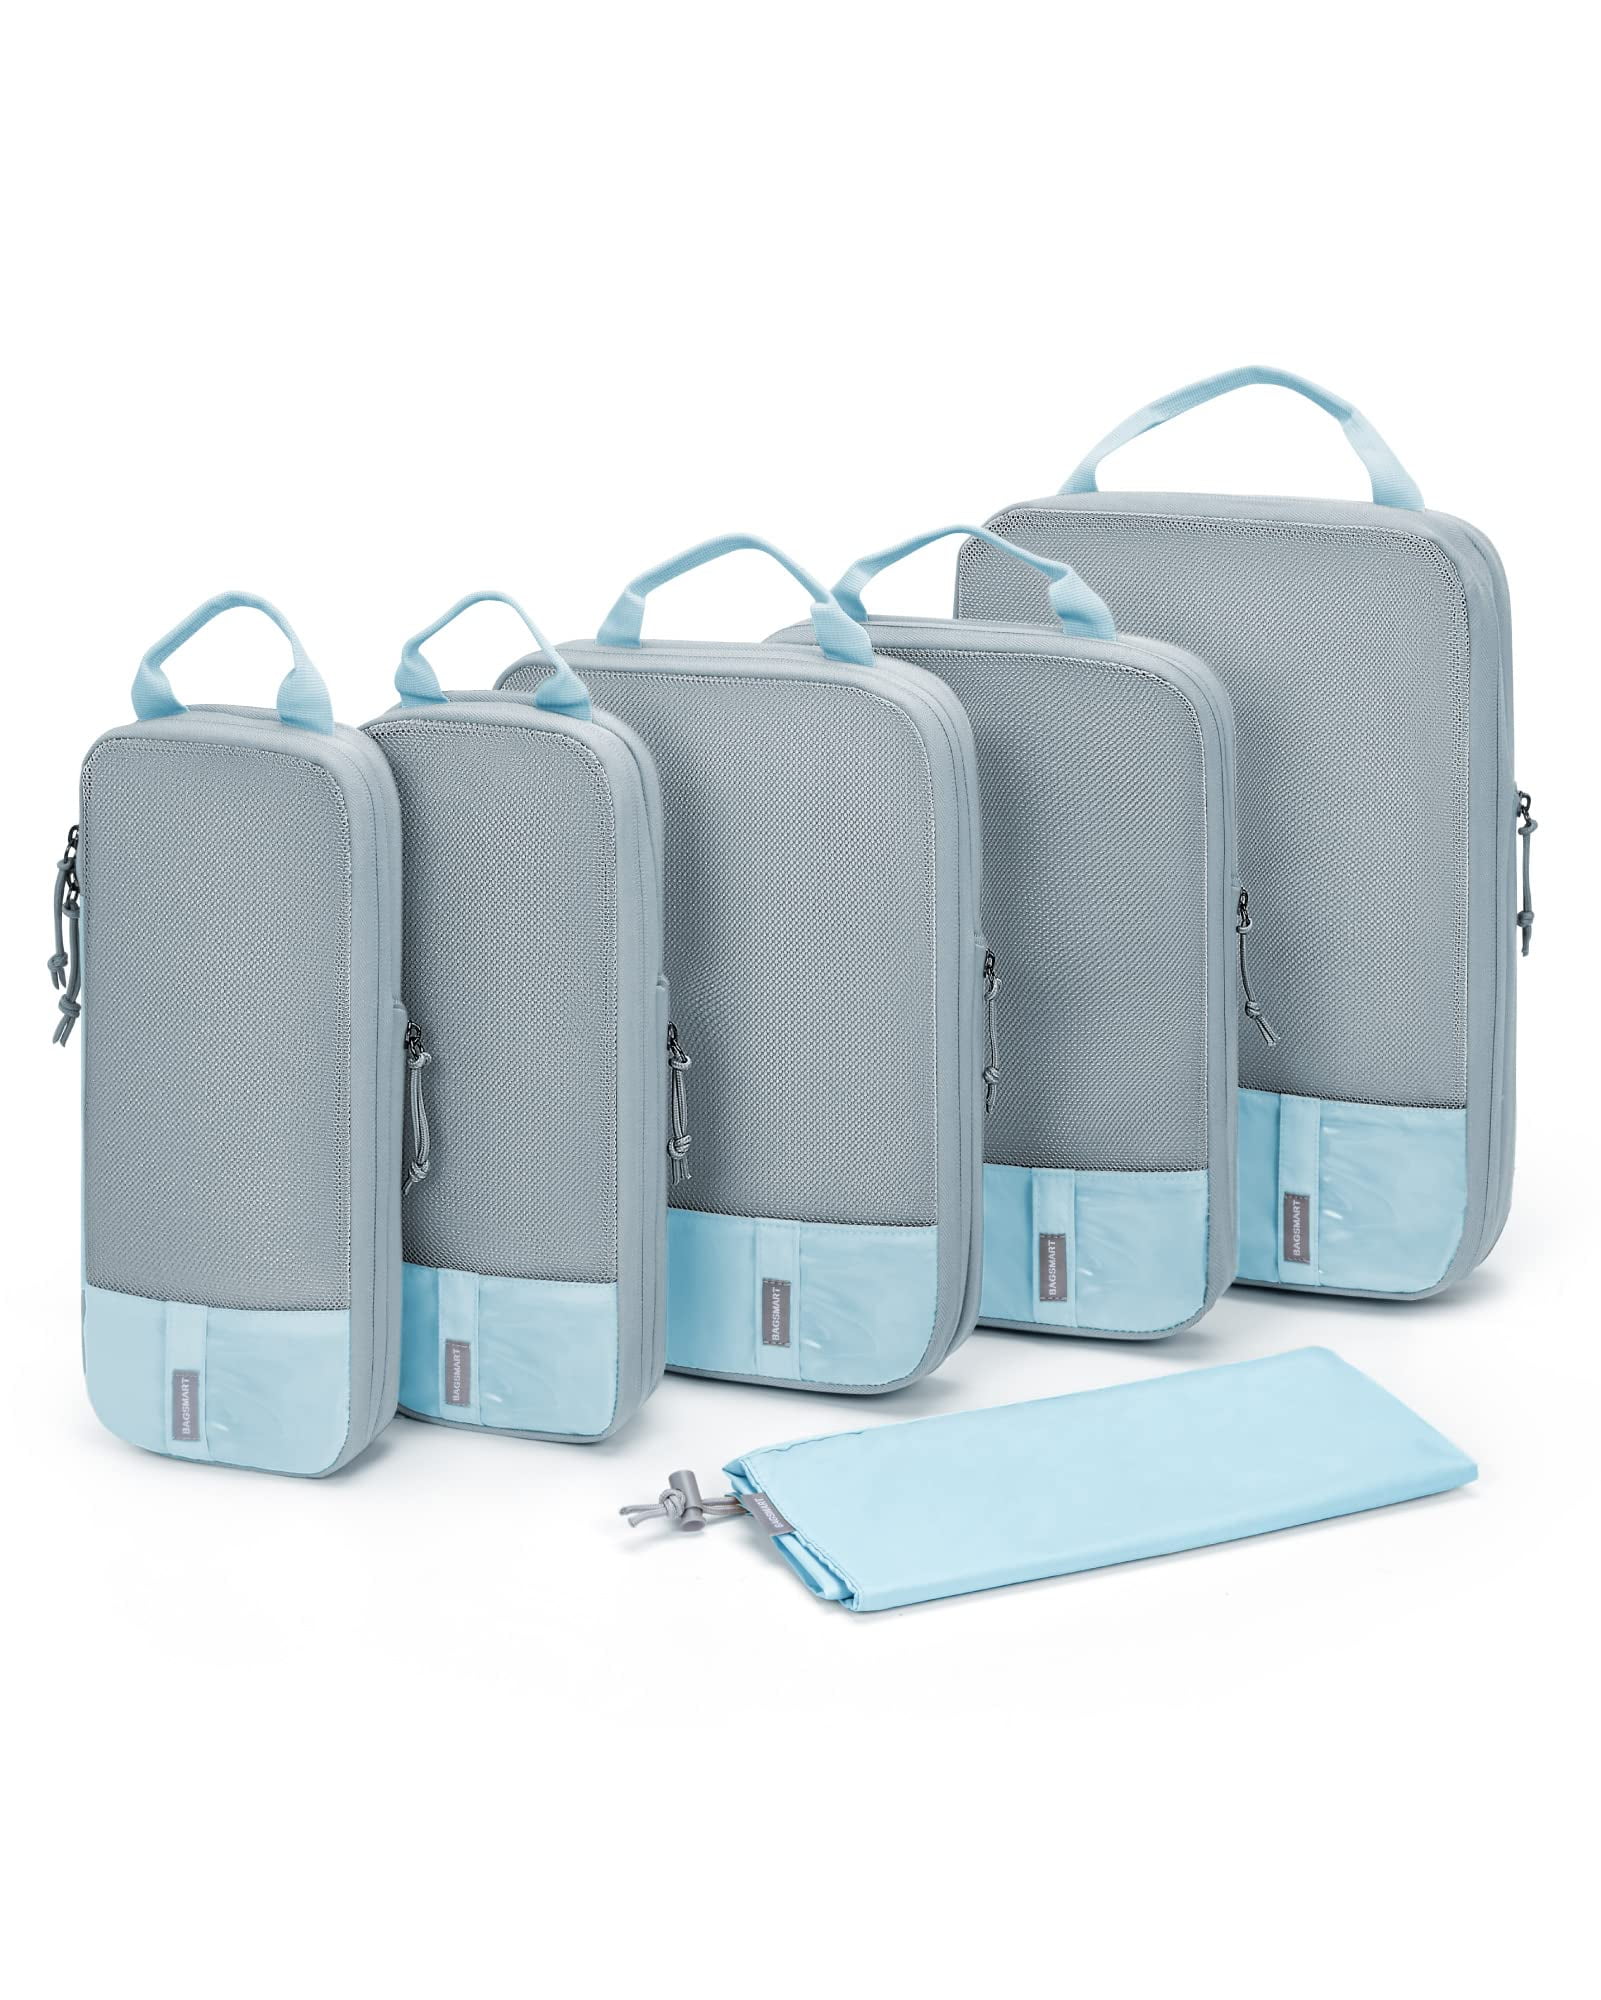 Compression Packing Cubes for Travel - Luggage and Backpack Organizer  Packaging Cubes for Clothes (Dusty Teal and White, 2 Piece Set)